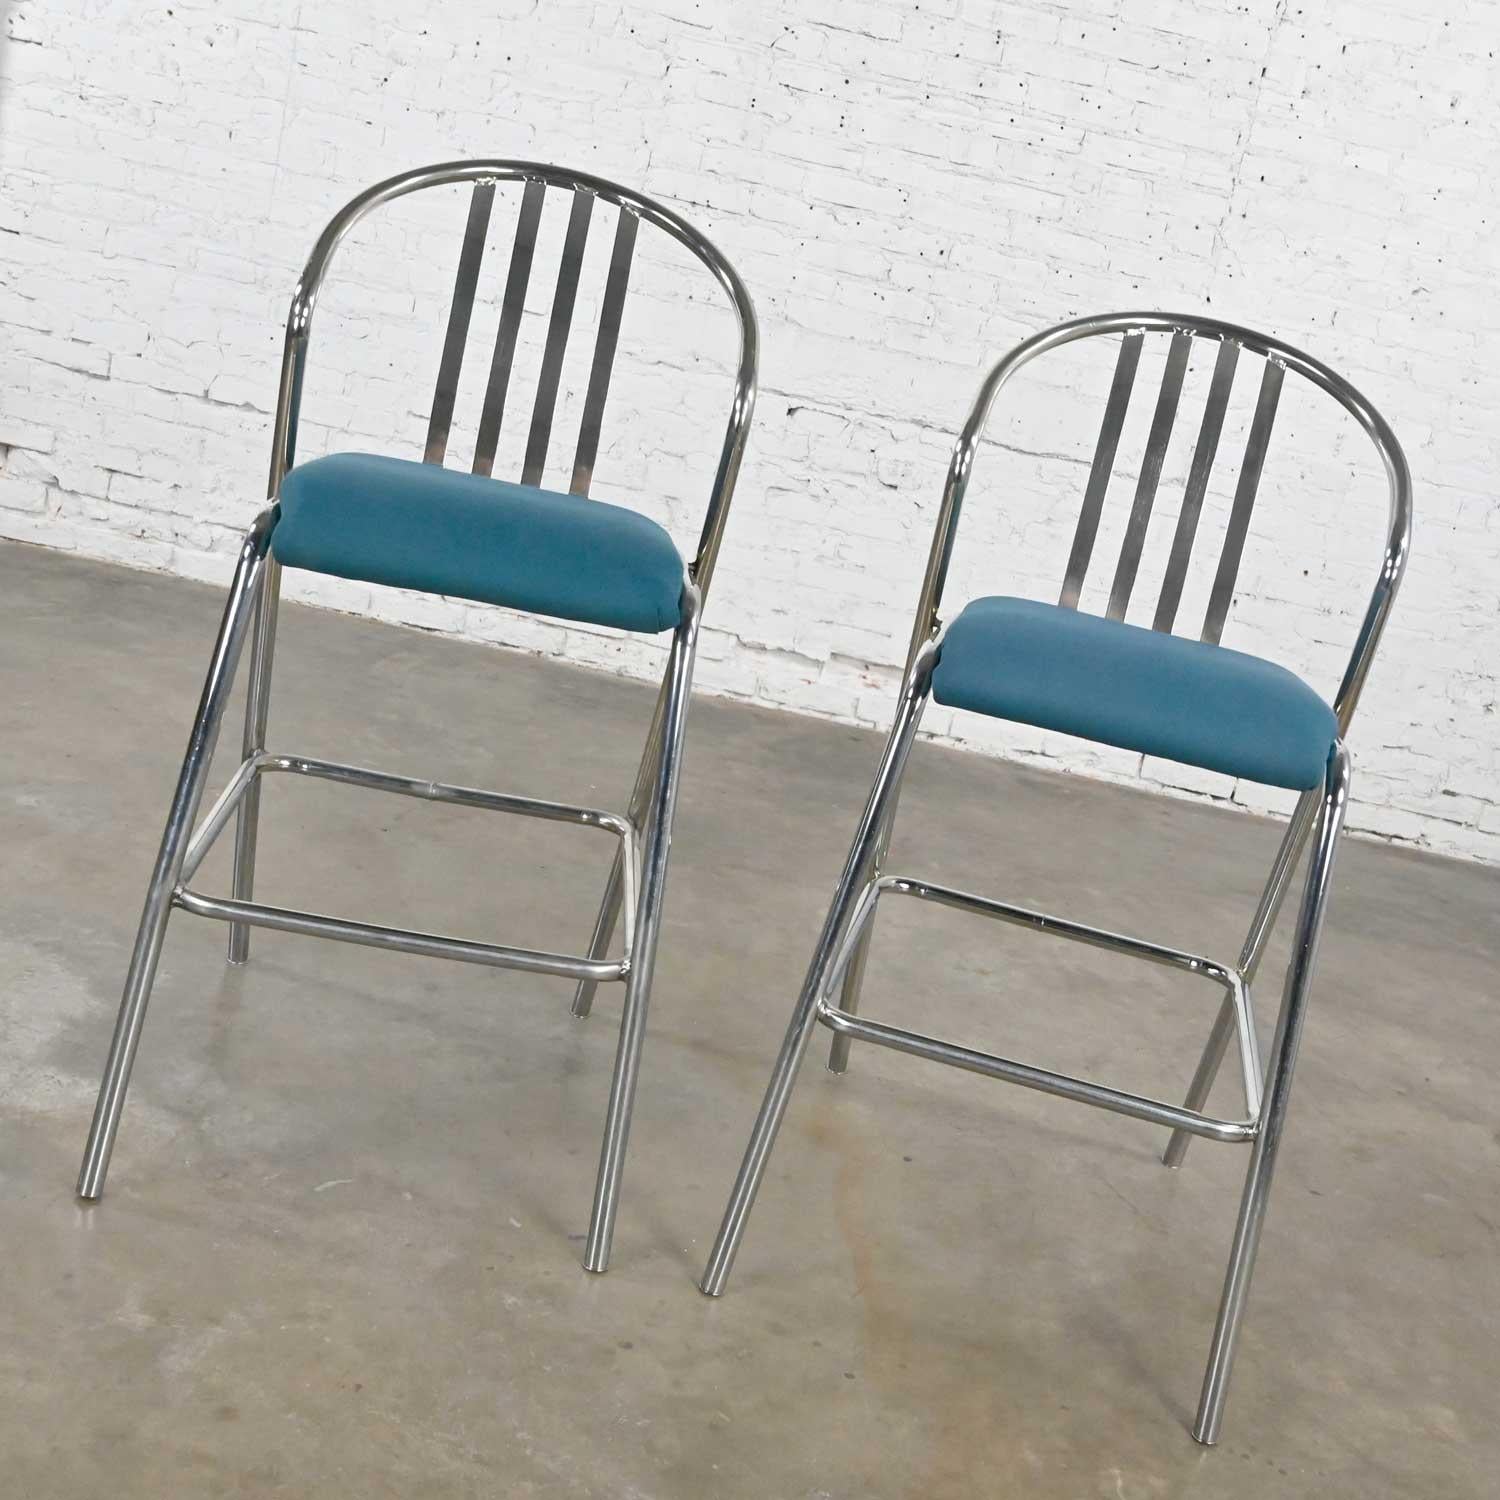 Fabulous Modern Industrial pair of bar height barstools comprised of chromed steel frames, blue gaberdine-like fabric seats, and new chrome tube cap feet. Beautiful condition, keeping in mind that this is vintage and not new so will have signs of